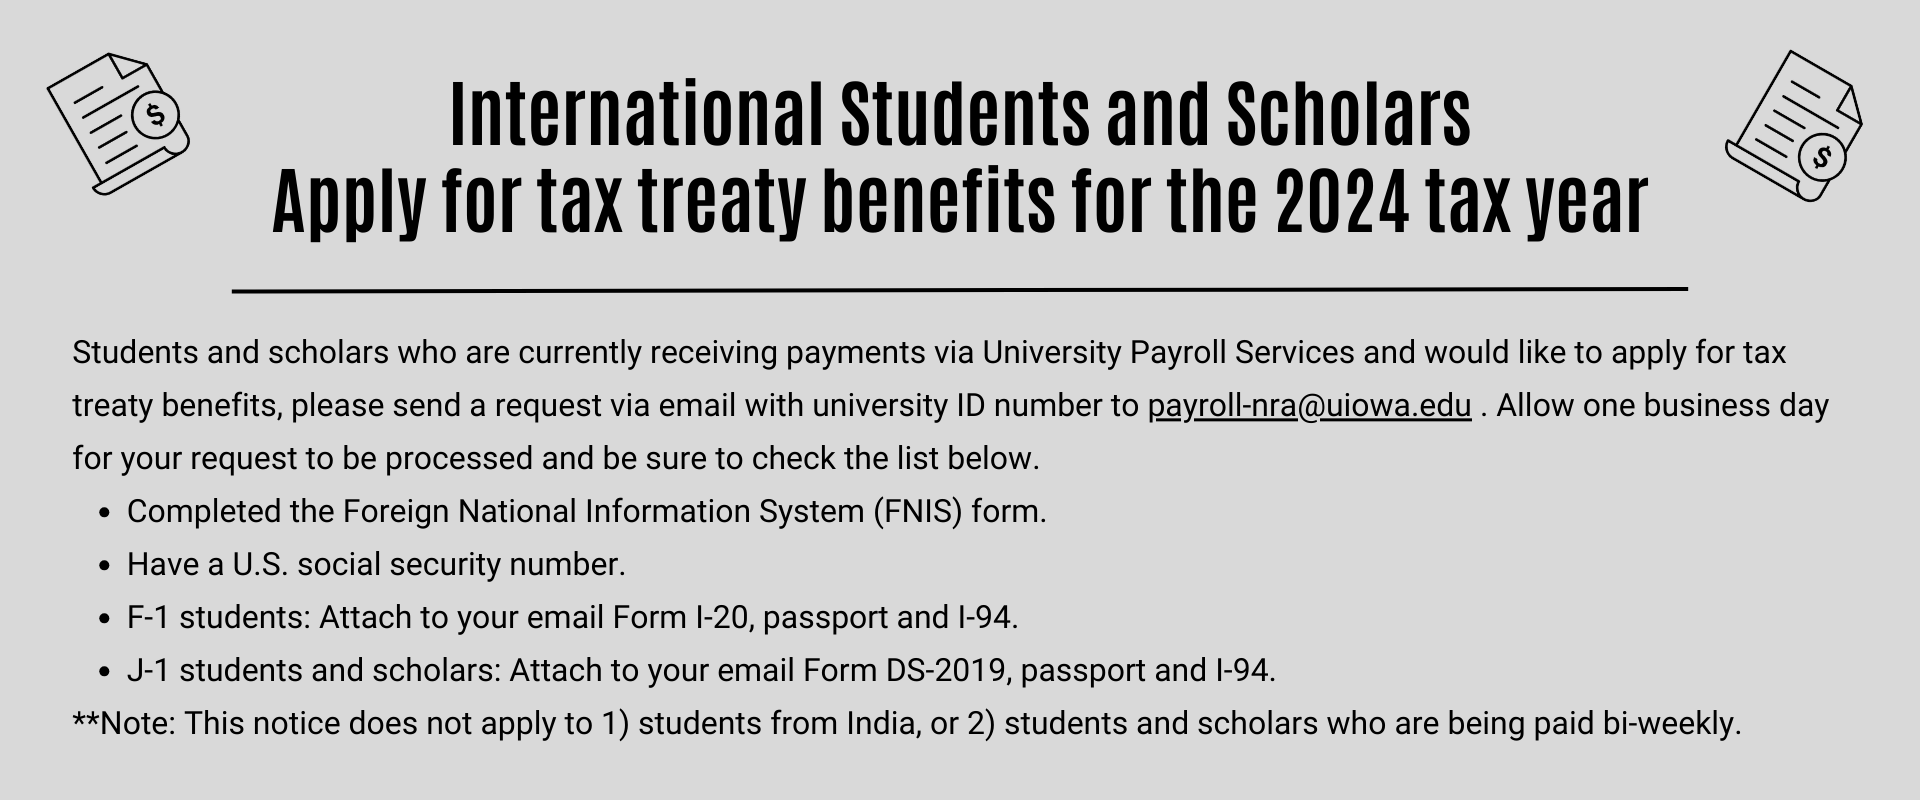 International Students and Scholars apply for 2024 tax benefits